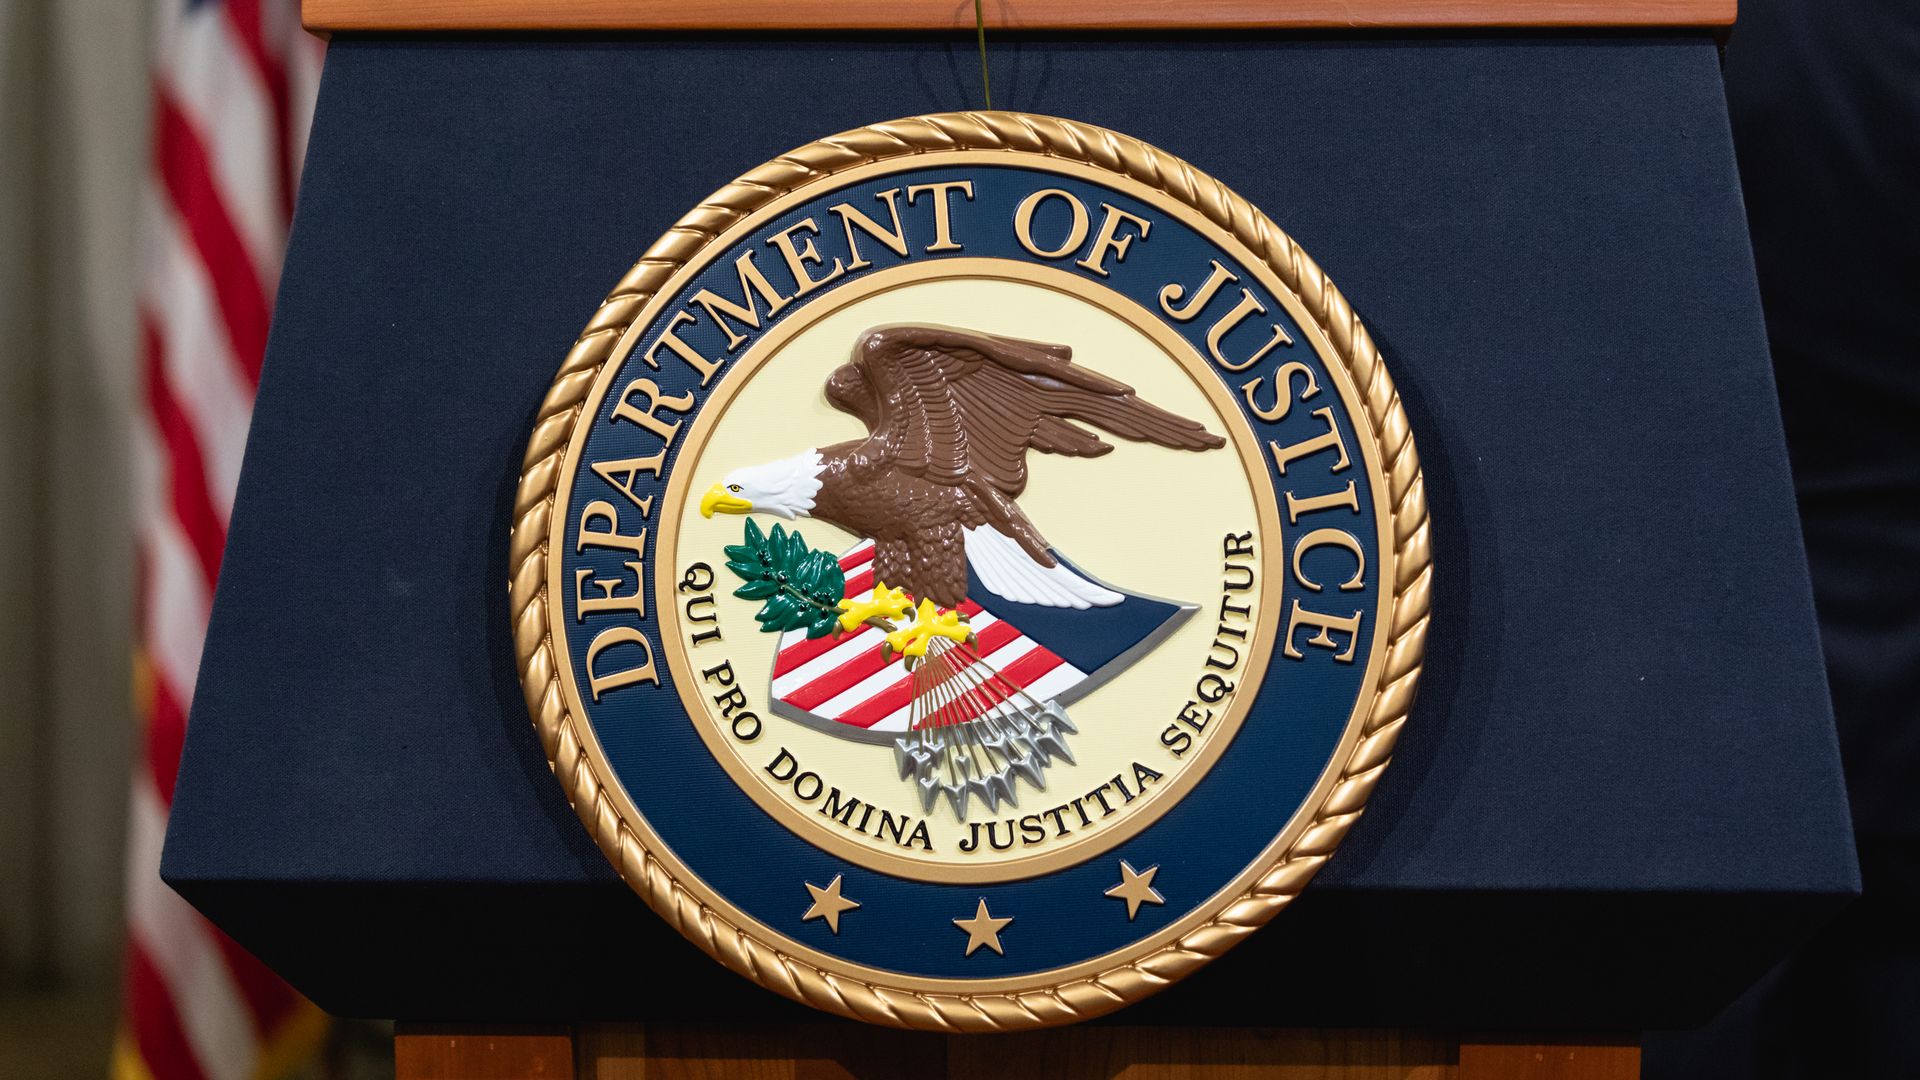 The Department of Justice seal on a podium in Washington, D.C., in 2018.